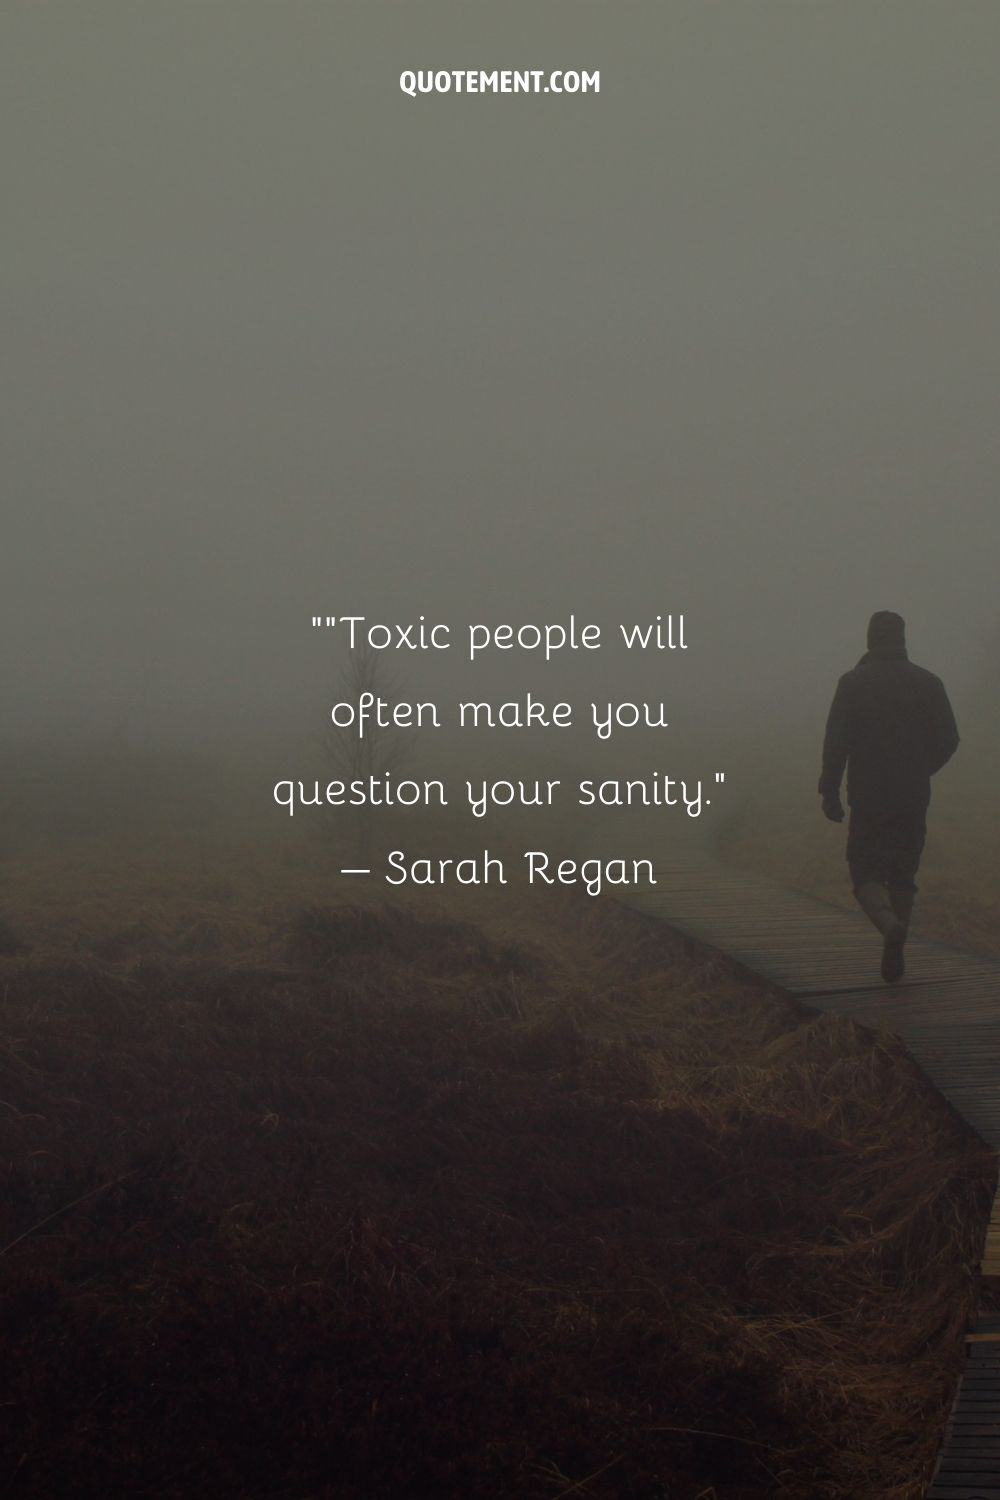 Toxic people will often make you question your sanity